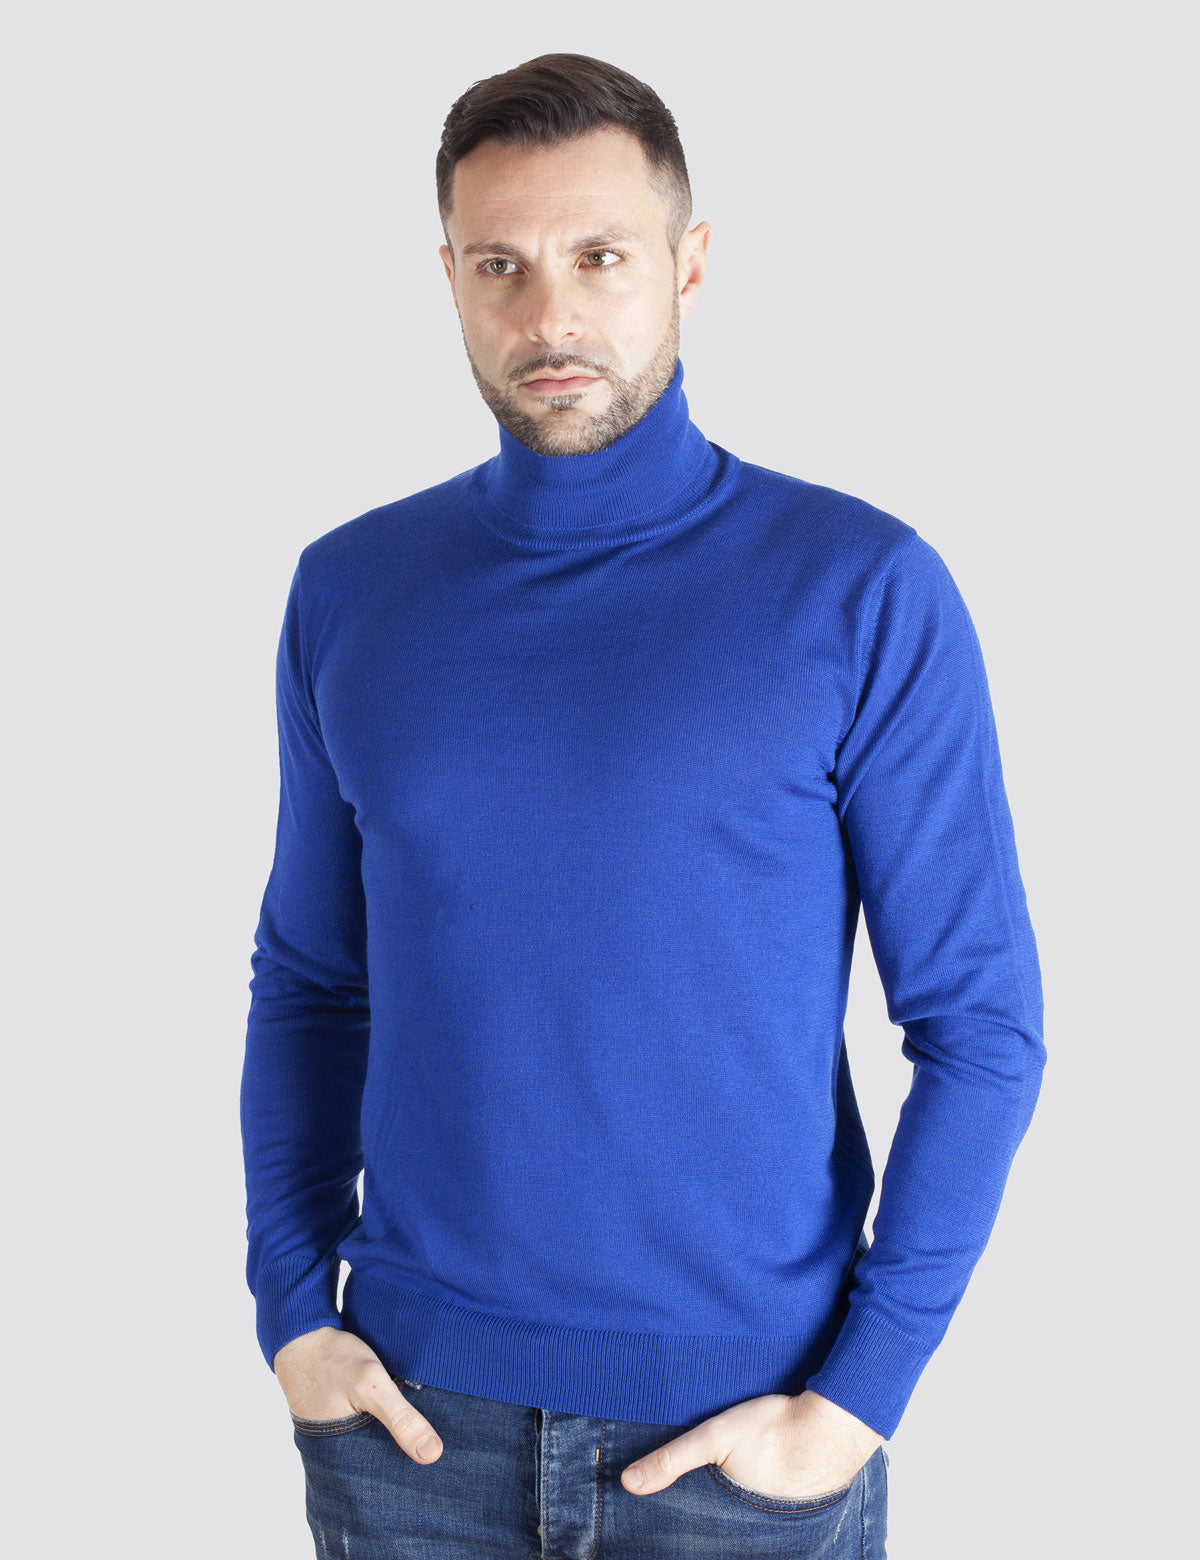 Pull à Col Roulé - Homme, Automne/Hiver - 100% Laine Vierge Mérinos Extrafine Sans Mulesing - 100% Made in Italy | Brunella Gori